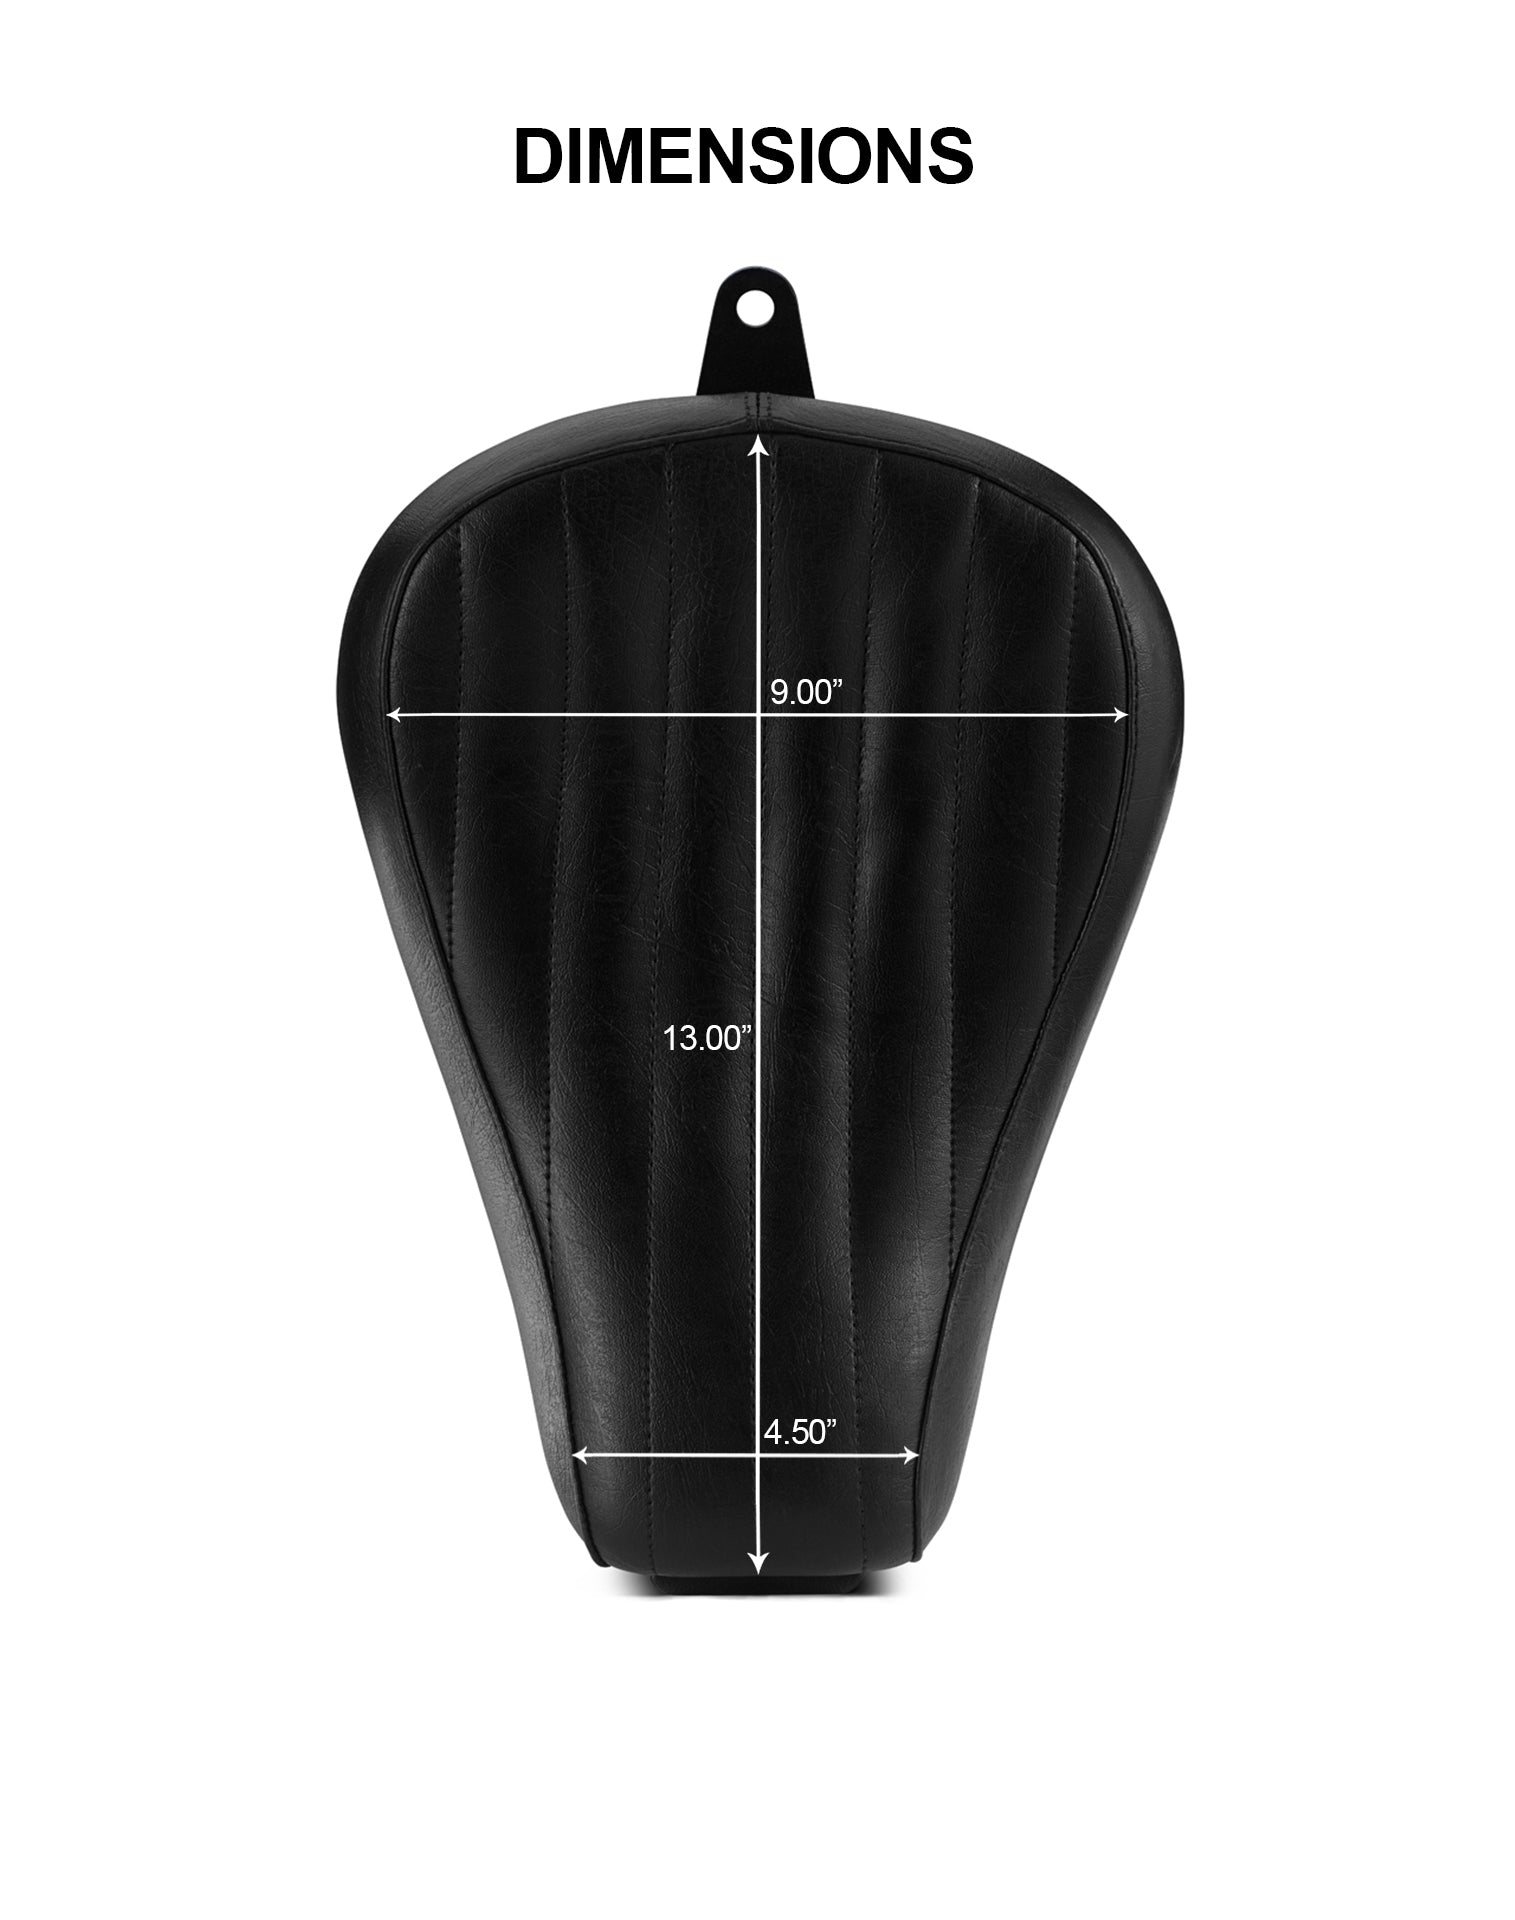 Iron Born Vertical Stitch Motorcycle Solo Seat for Harley Sportster SuperLow Seat Dimensions